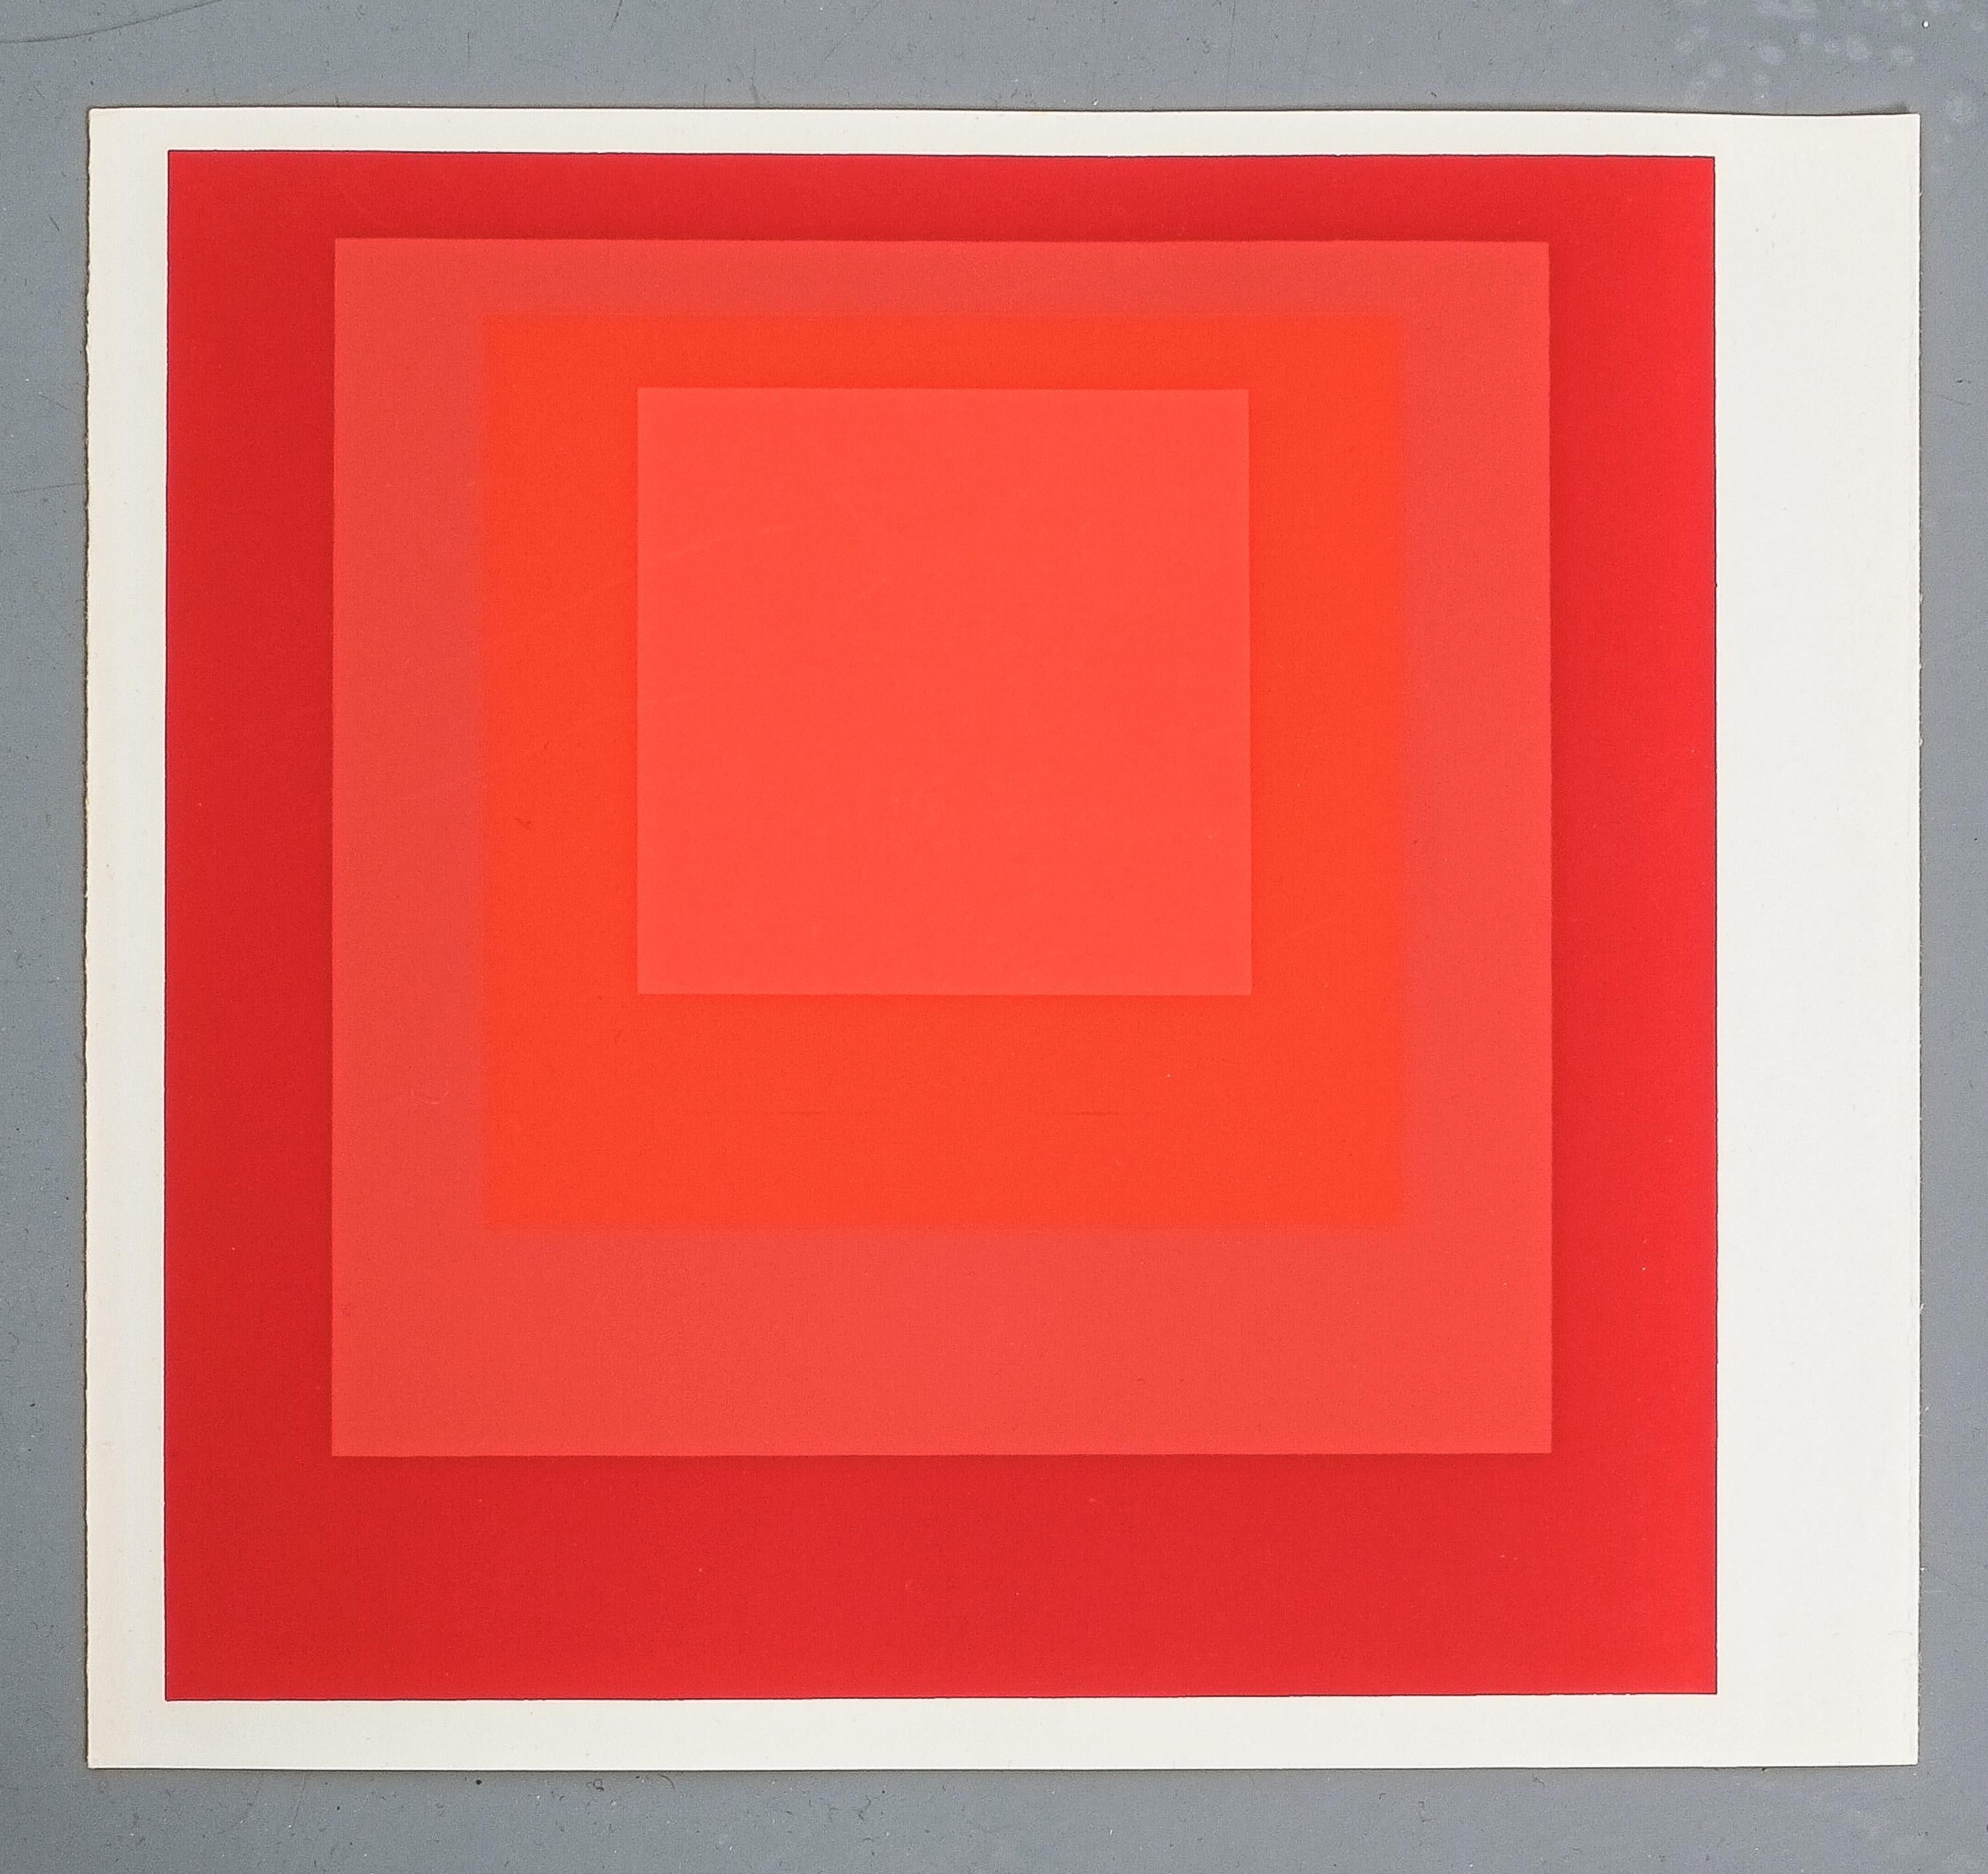 Mid-Century Modern 1 of 9 Screen-Prints Serigraph after Josef Albers, 1977